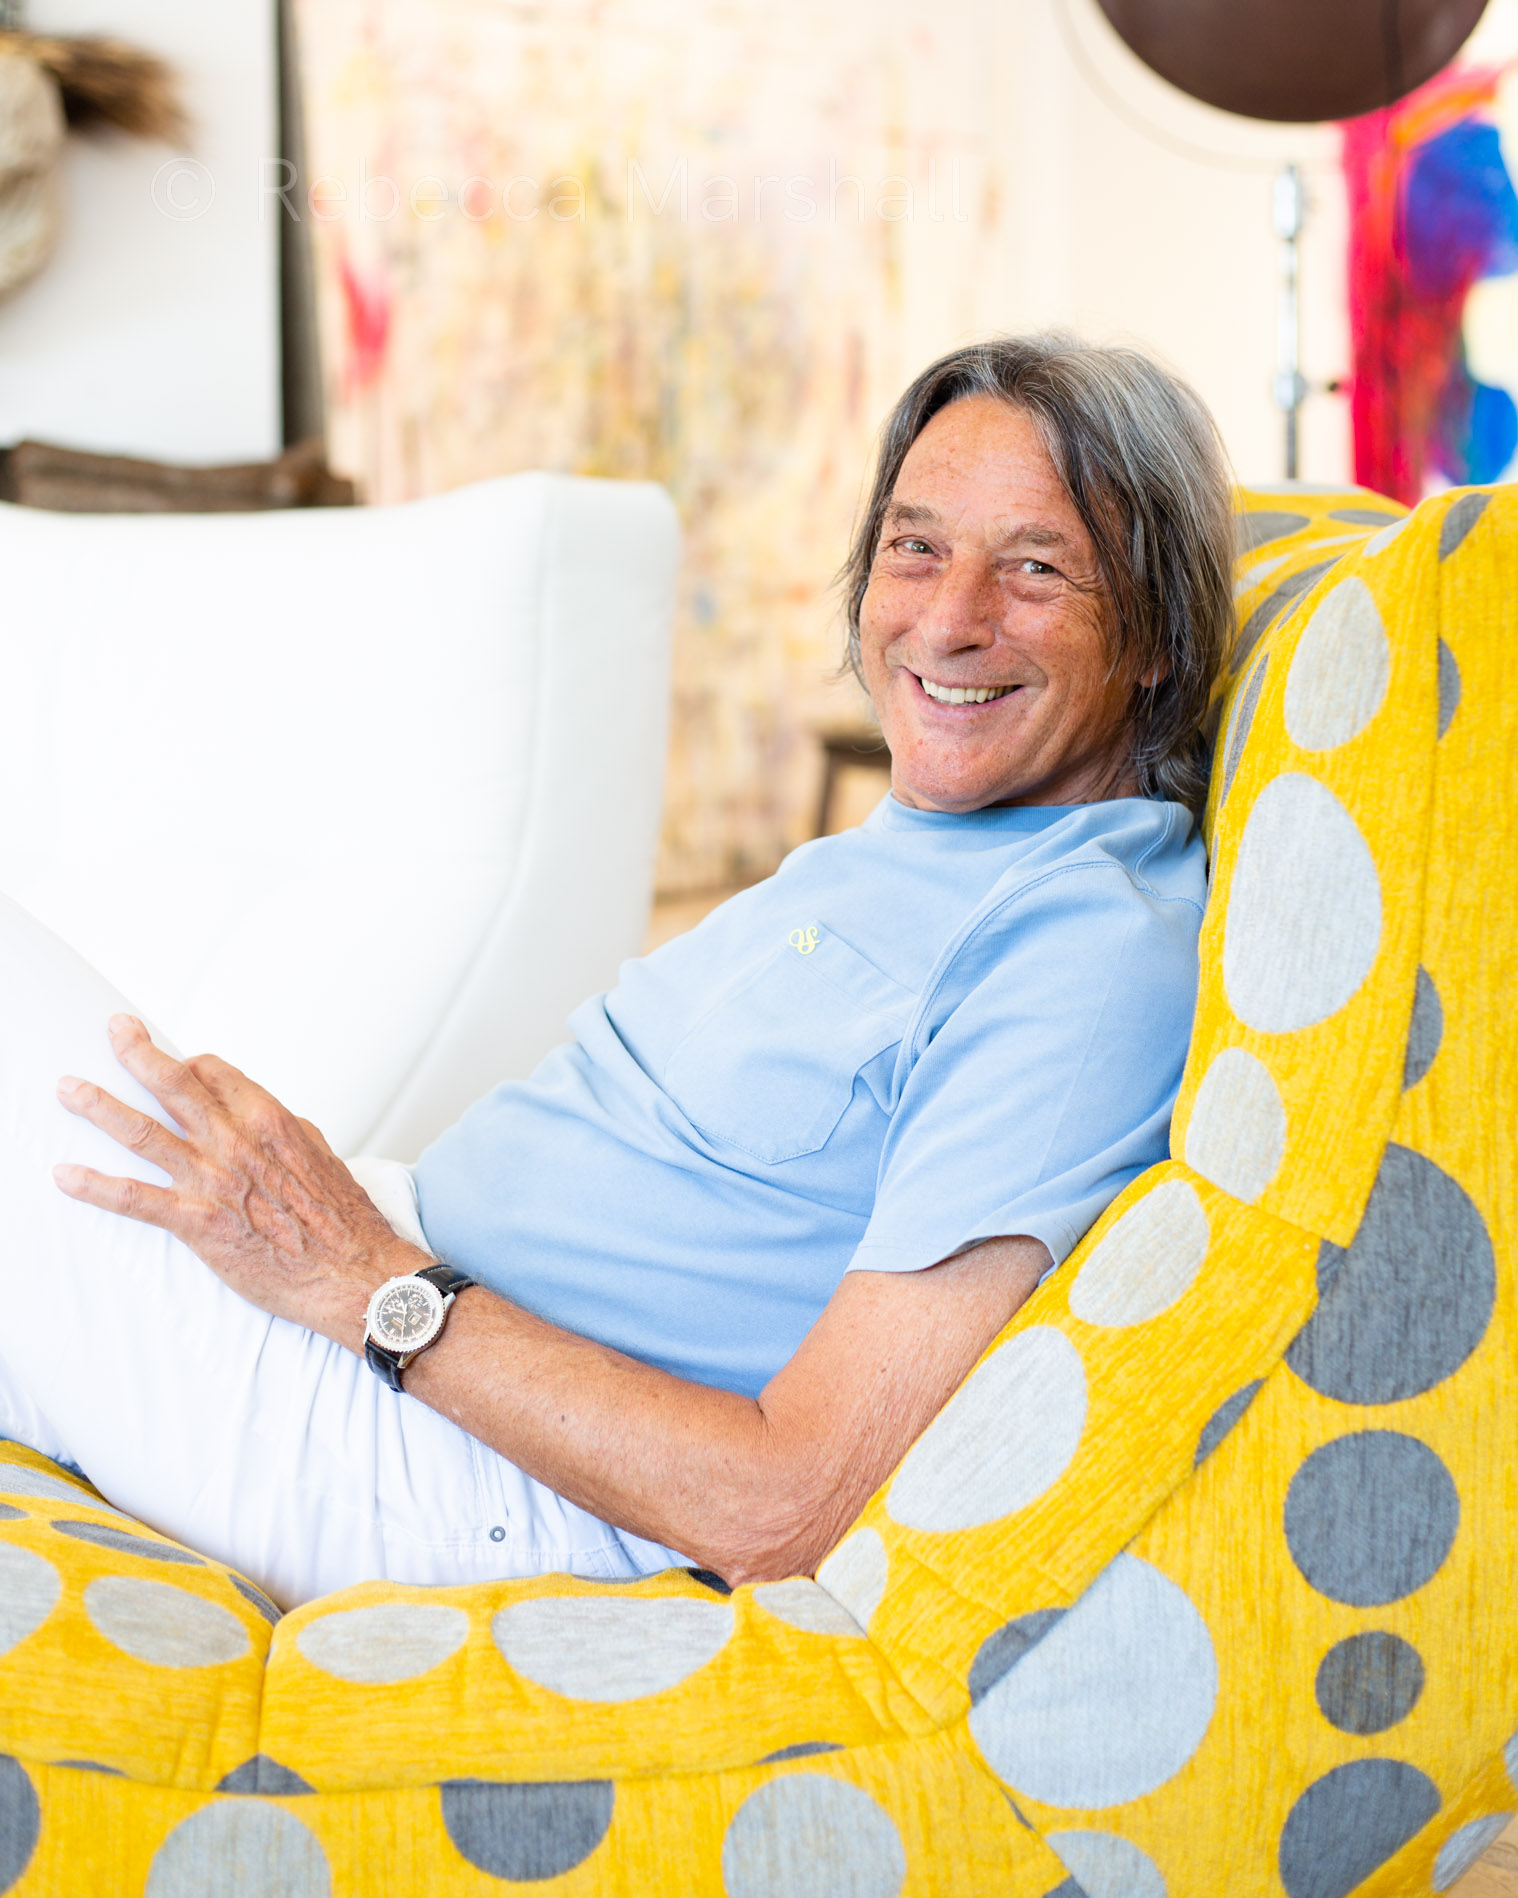 Smiling man in blue t-shirt sitting on a yellow spotted couch